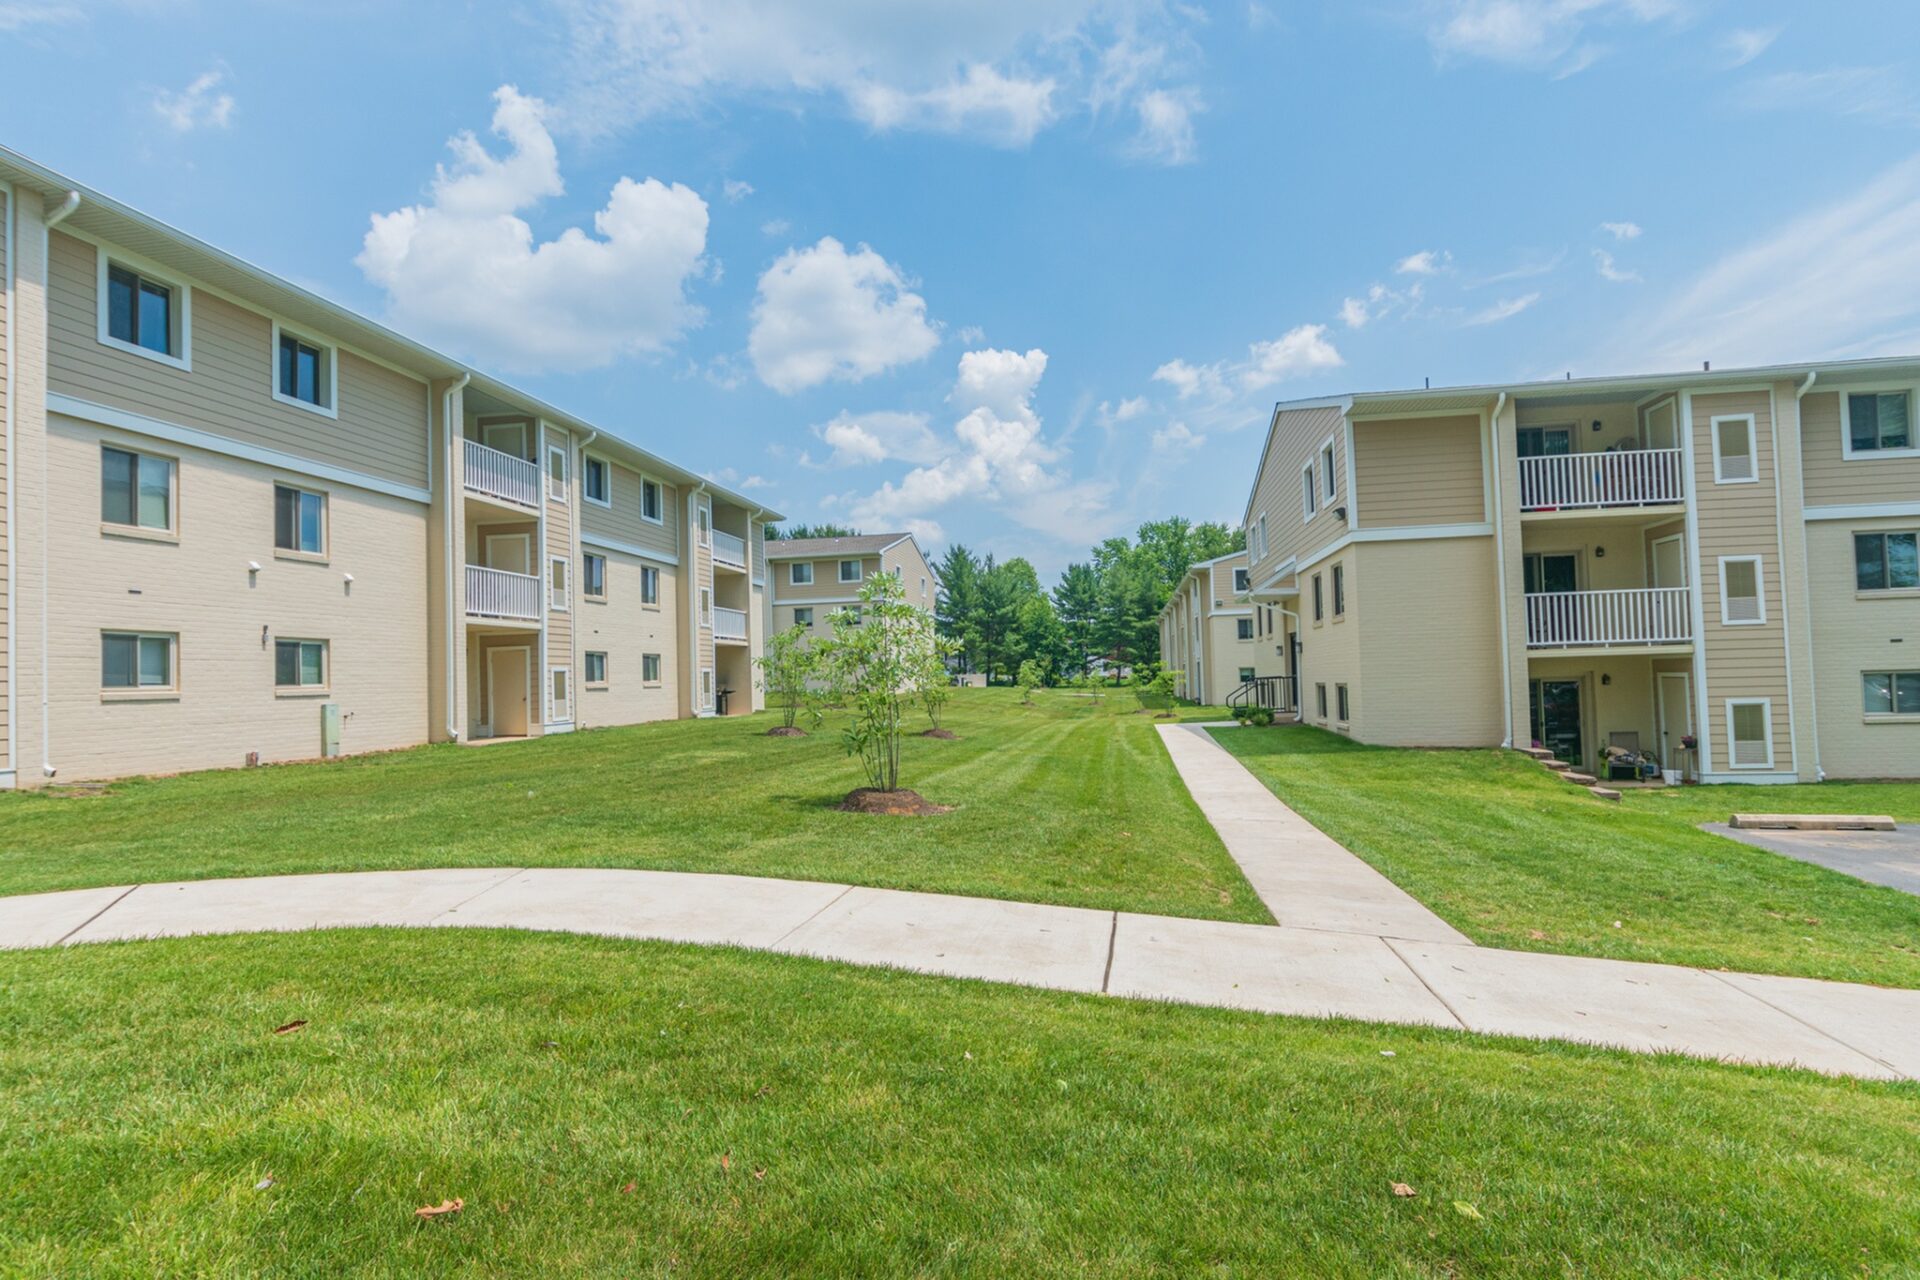 Exterior area of apartment building at Caln East, fitted with a lawn, and a paved walkway